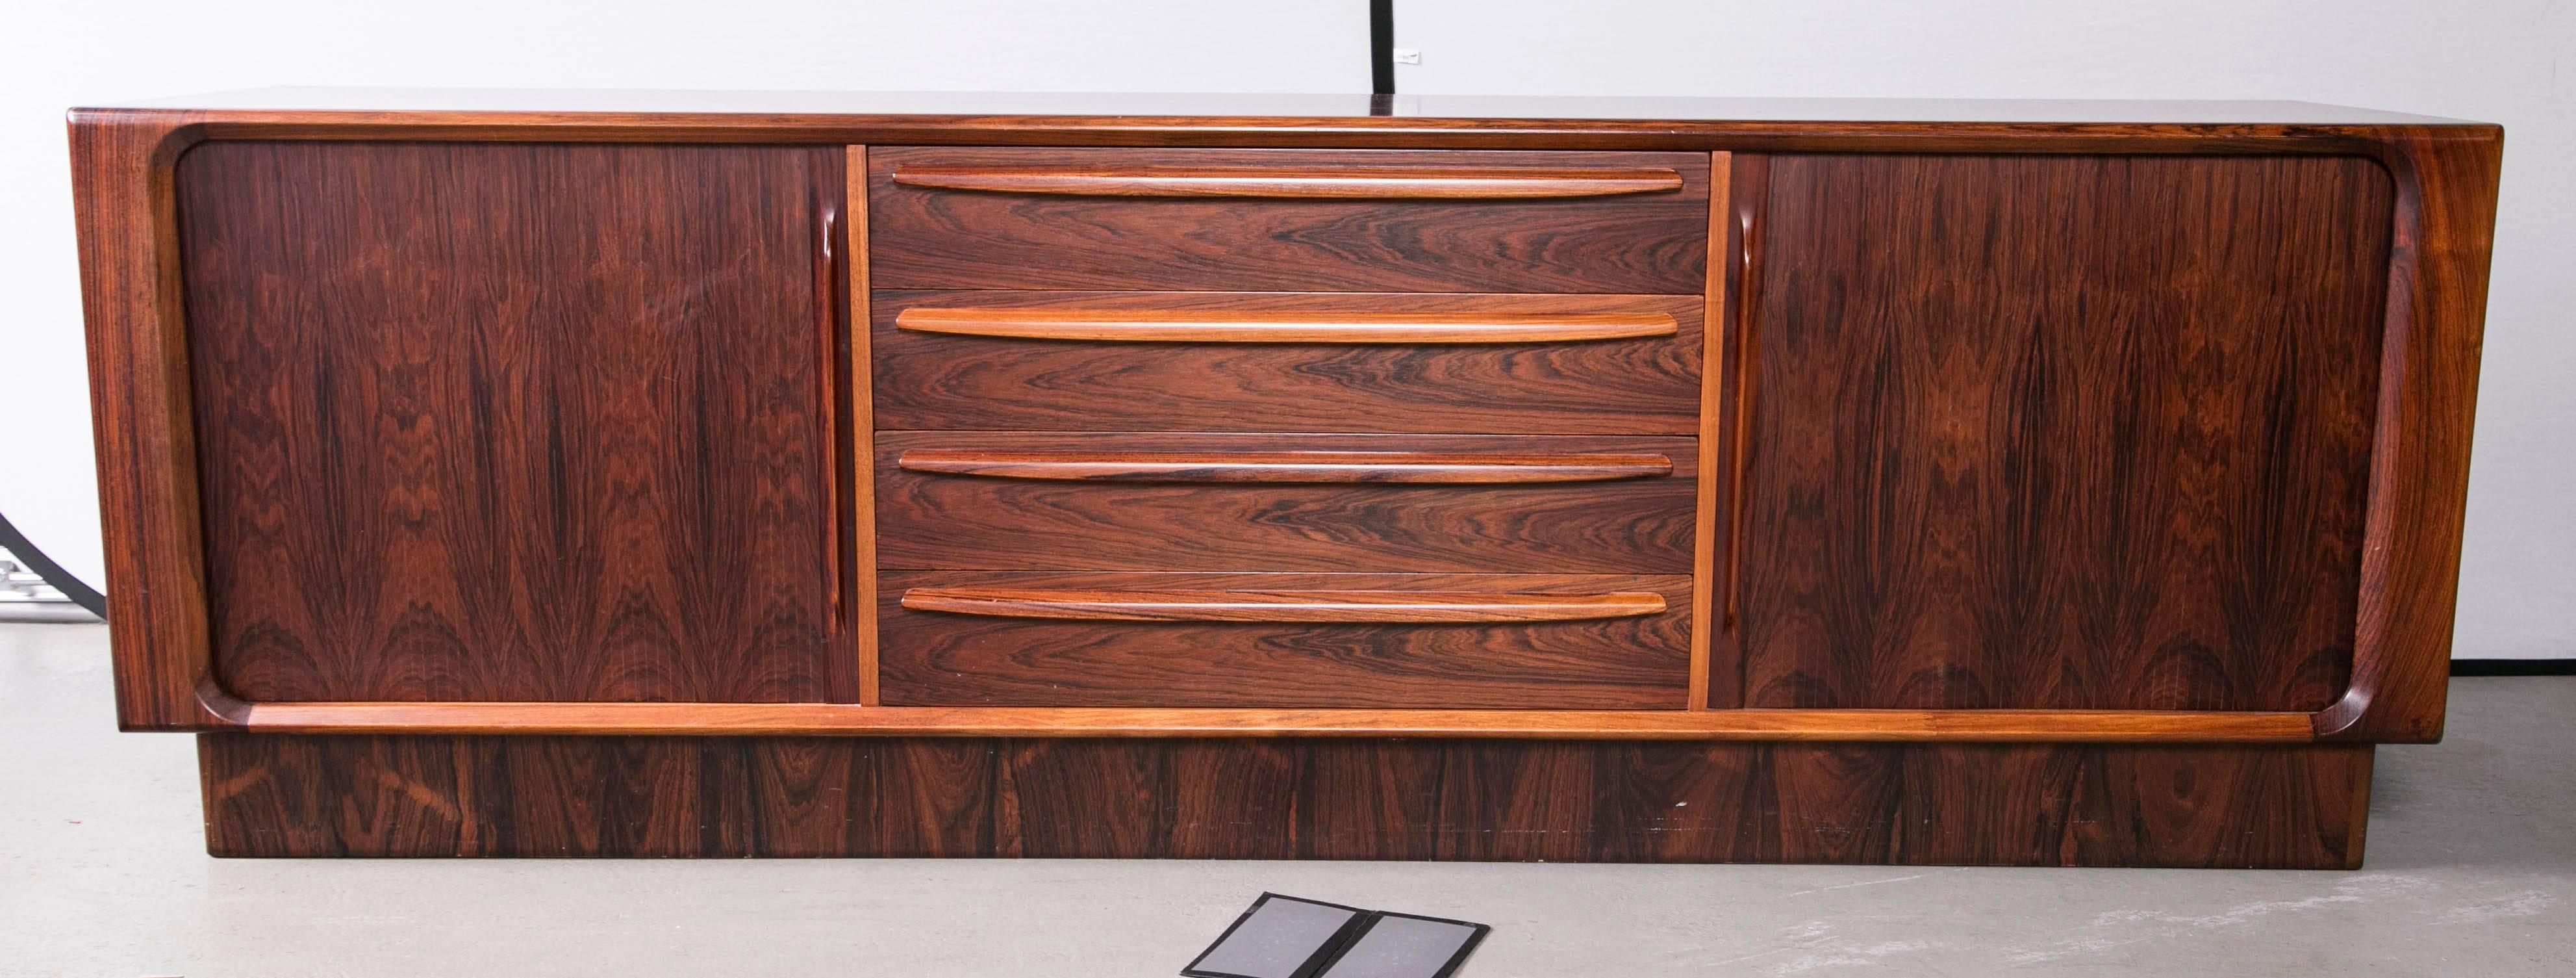 A Danish modern platform base credenza with drawers and shelving behind sliding doors. Produced by Dyrlund of Denmark for Maurice Villency NYC.